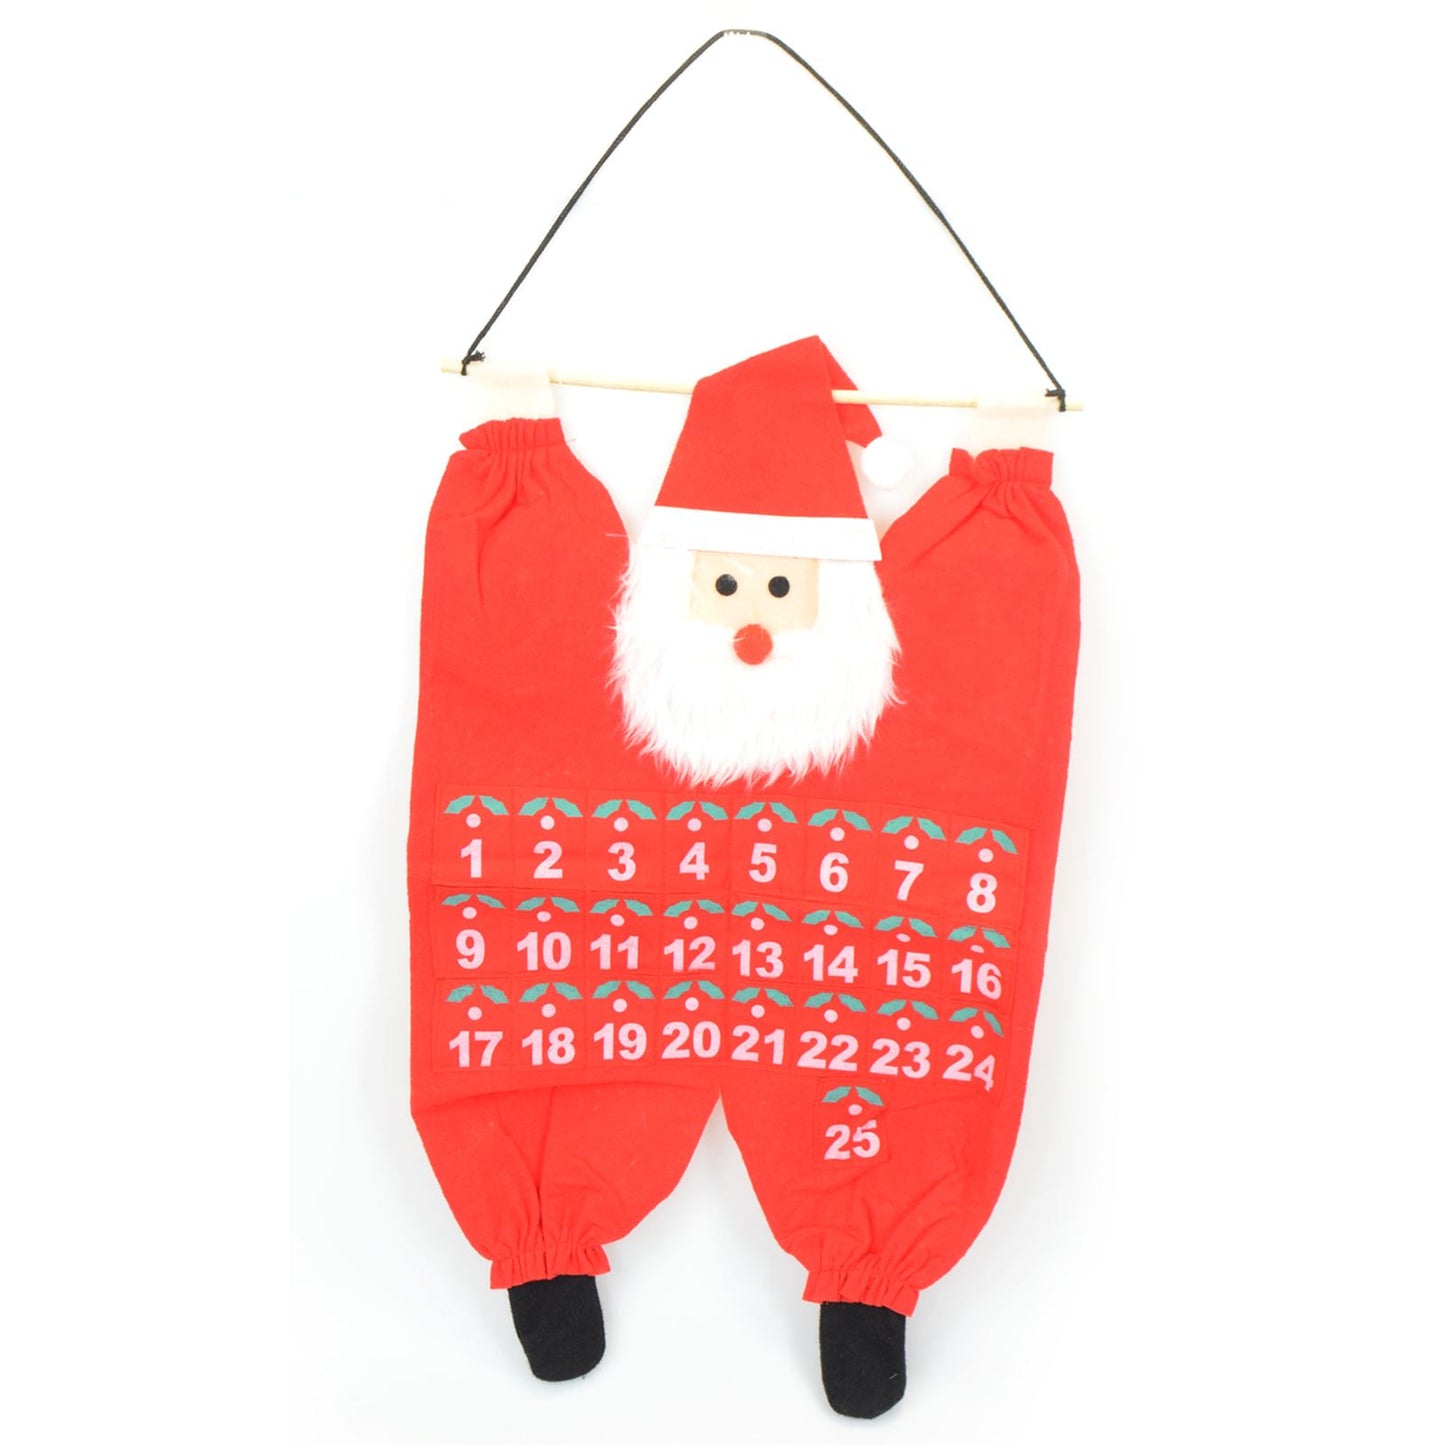 Festive Christmas Decorations and Hanging Gifts Ideas